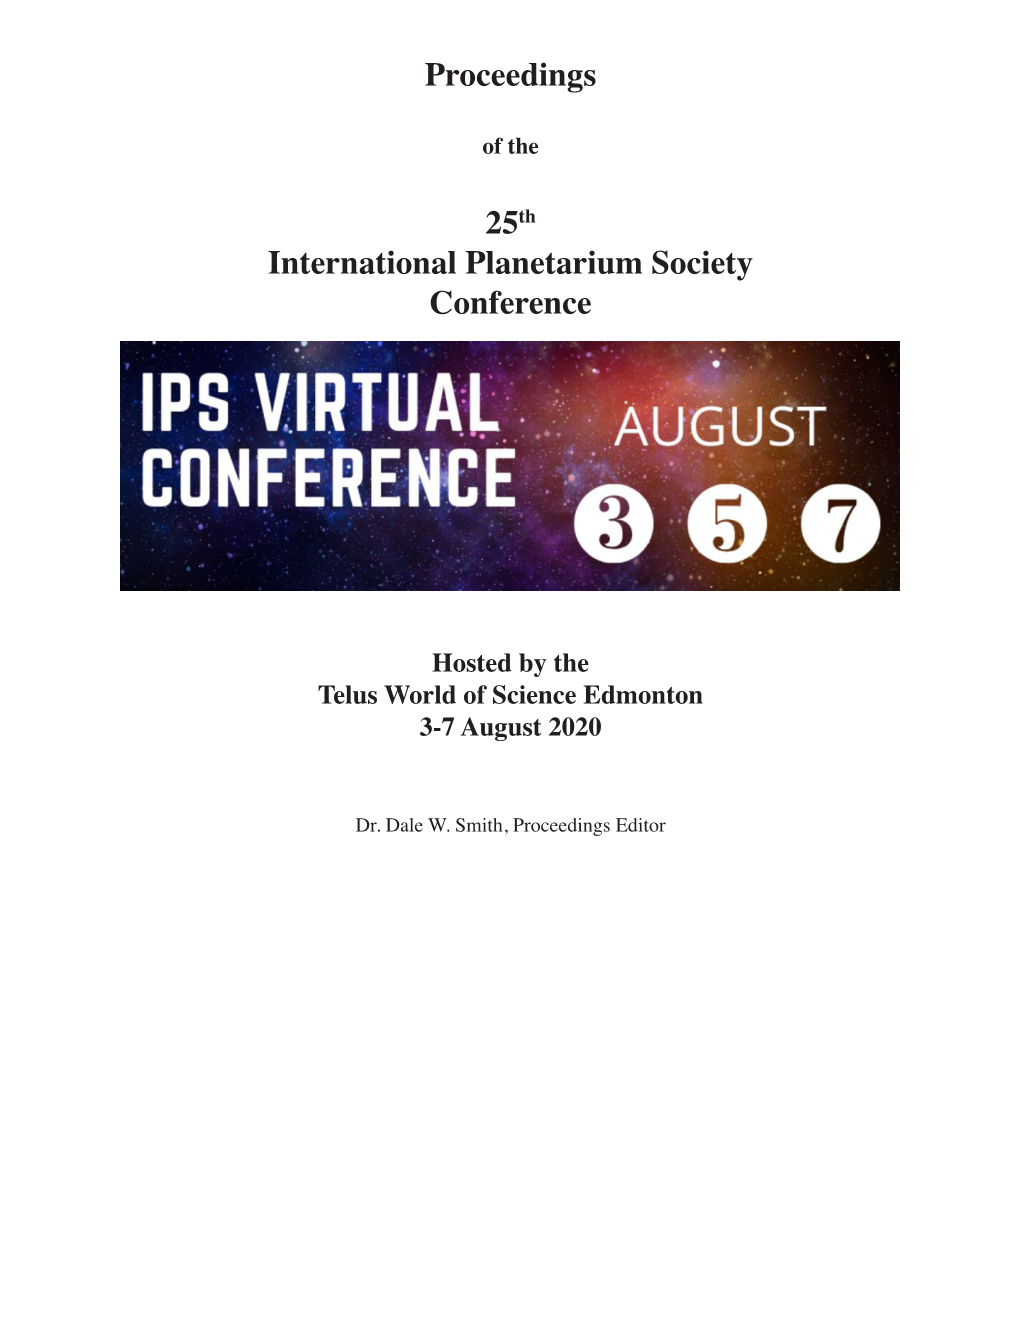 The Compiled IPS 2020 Virtual Conference Proceedings